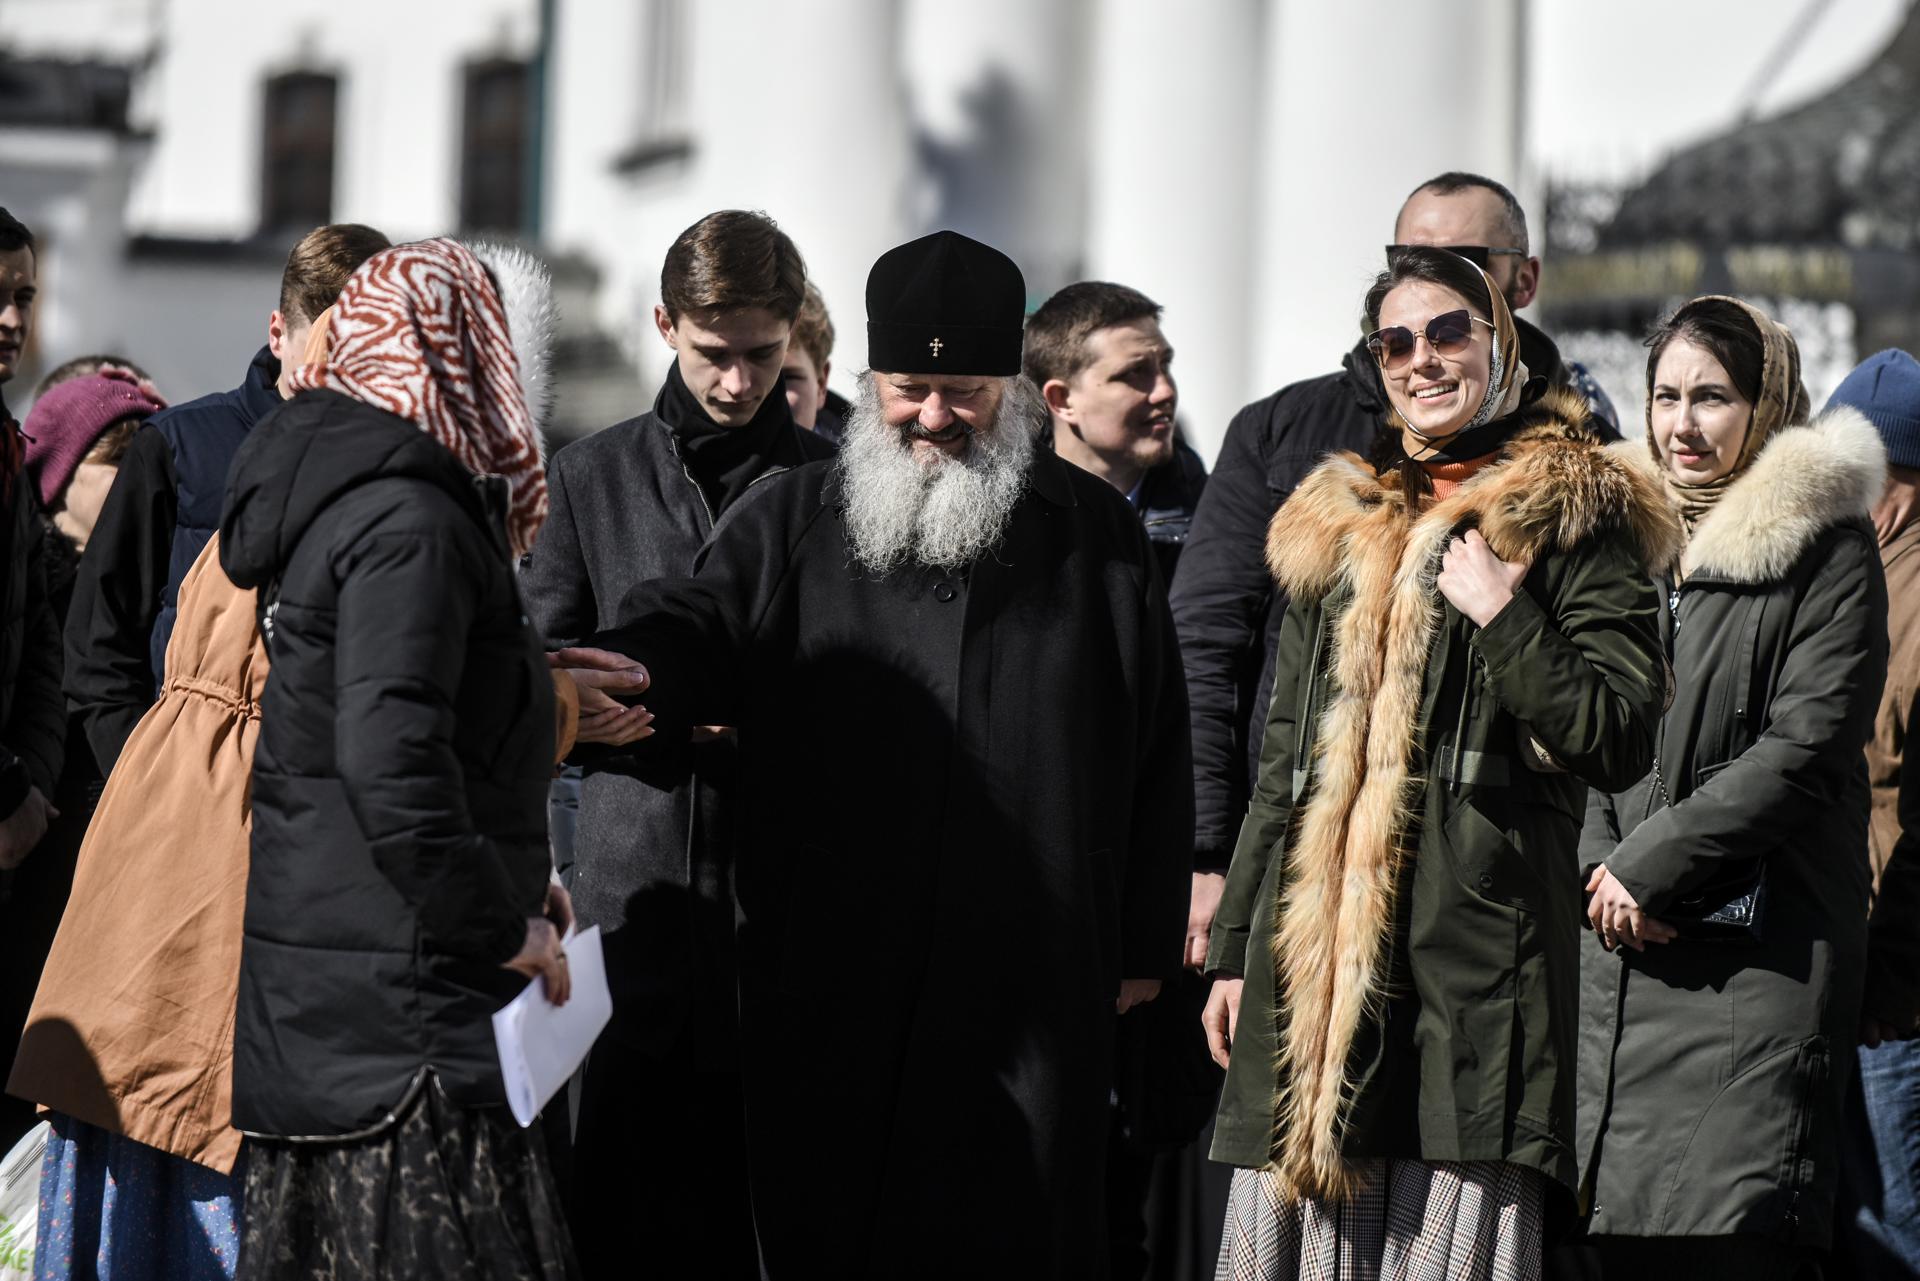 Pavlo, the abbot of the Kyiv-Pechersk Lavra and Metropolitan of the Ukrainian Orthodox Church of the Moscow Patriarchate (UOC-MP), joins believers of the UOC-MP at the Kyiv-Pechersk Lavra (Monastery of the Caves) monastery complex, in Kyiv, Ukraine, 30 March 2023. EFE/EPA/OLEG PETRASYUK